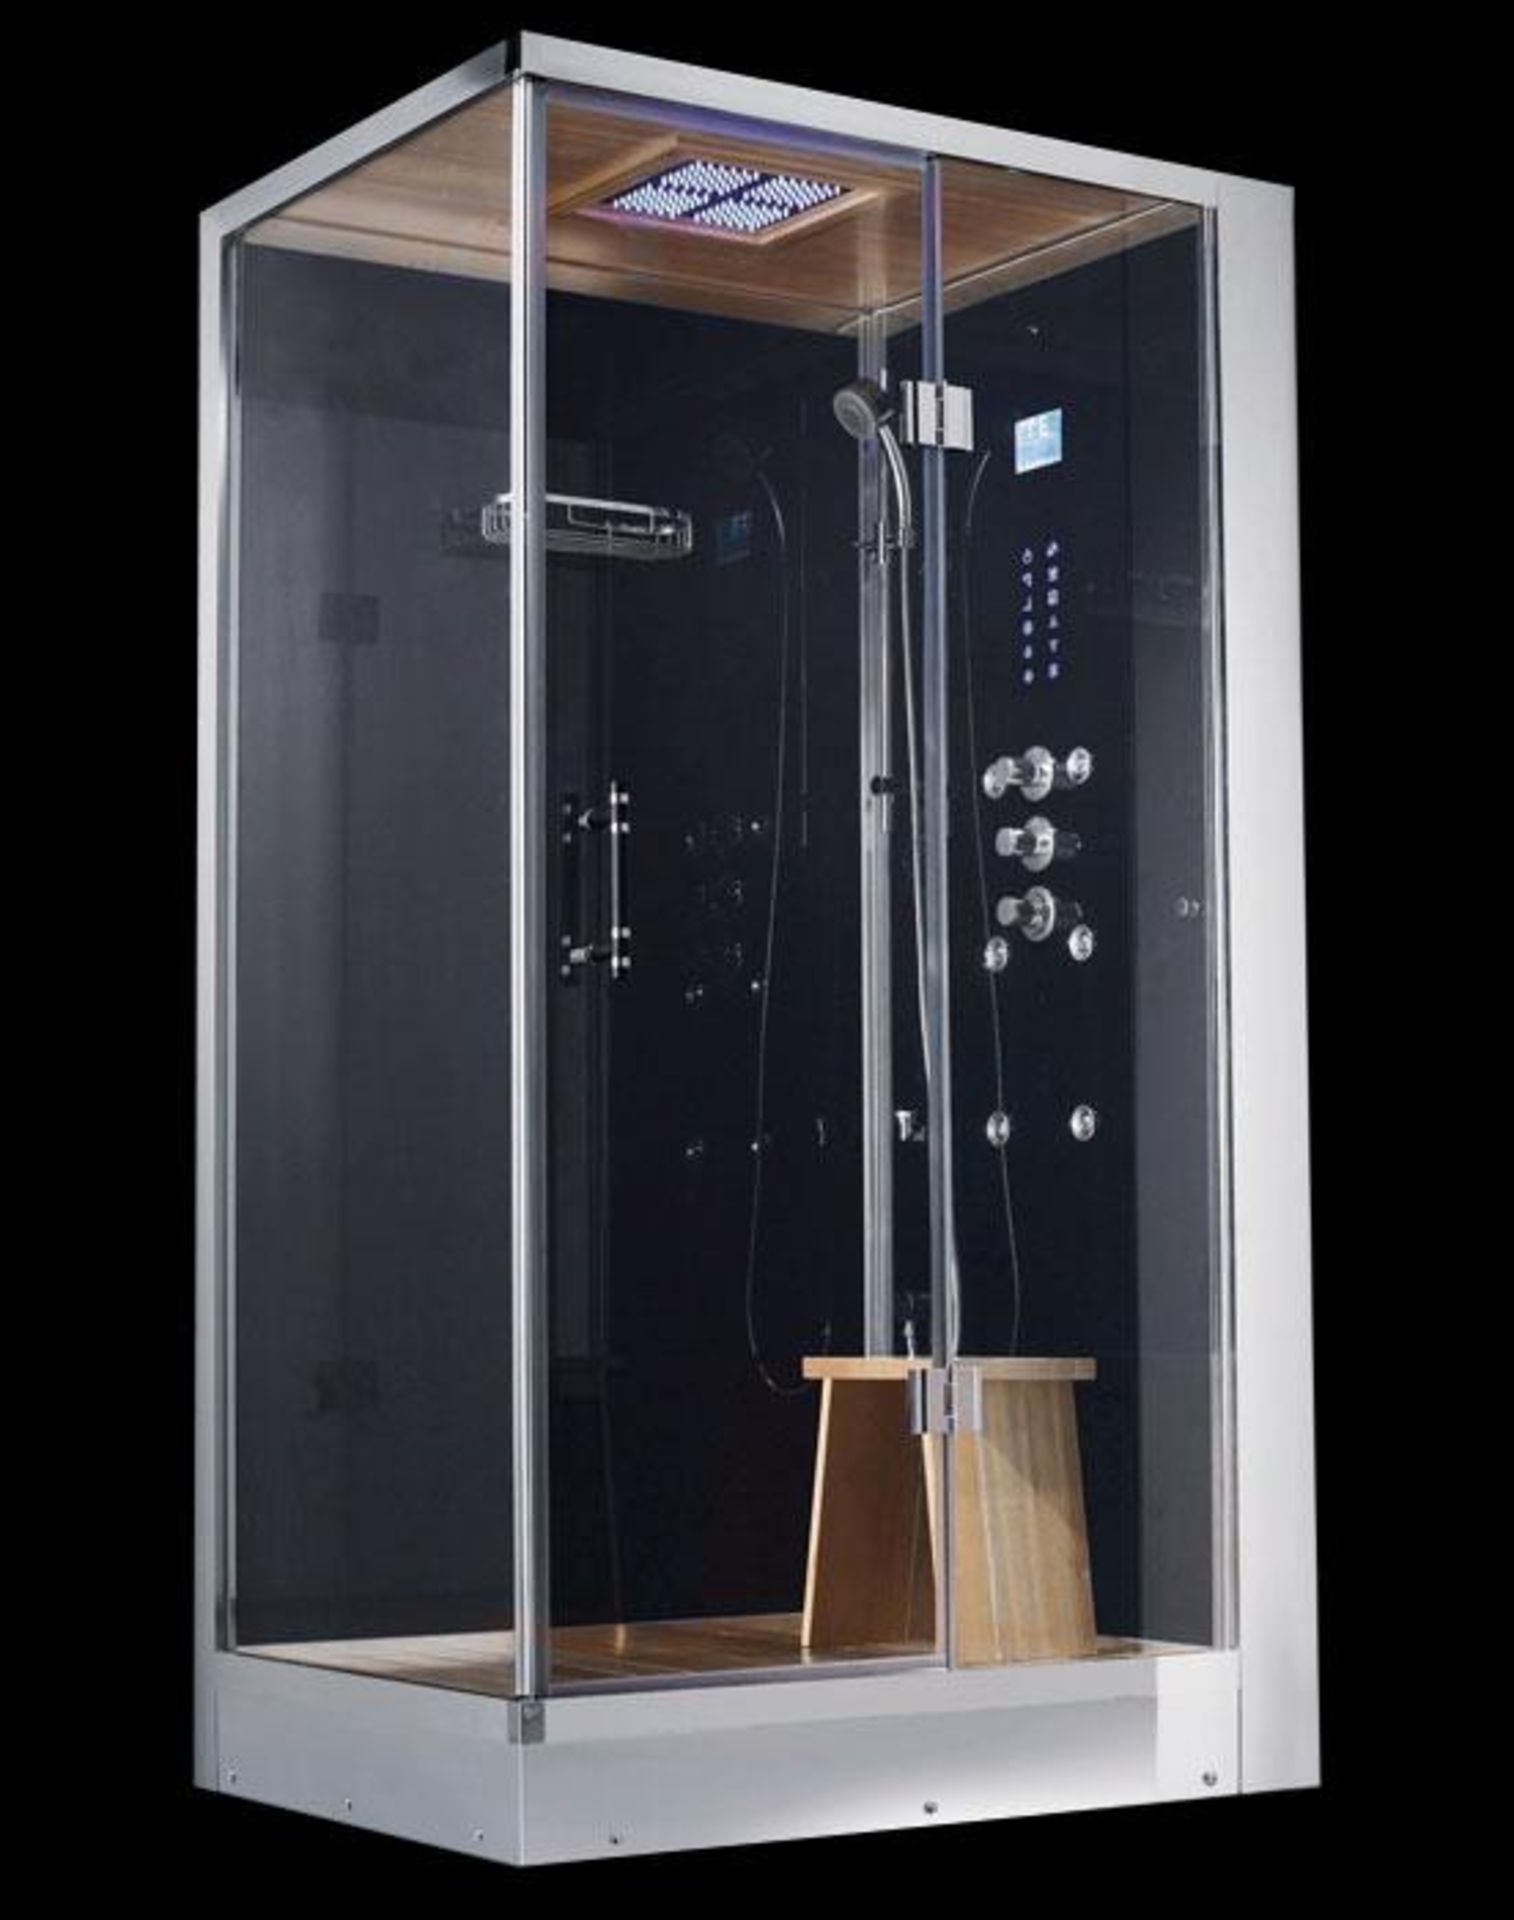 New York ADS 67 WR Steam Shower (New and Unused, Boxed) RRP £5395.00